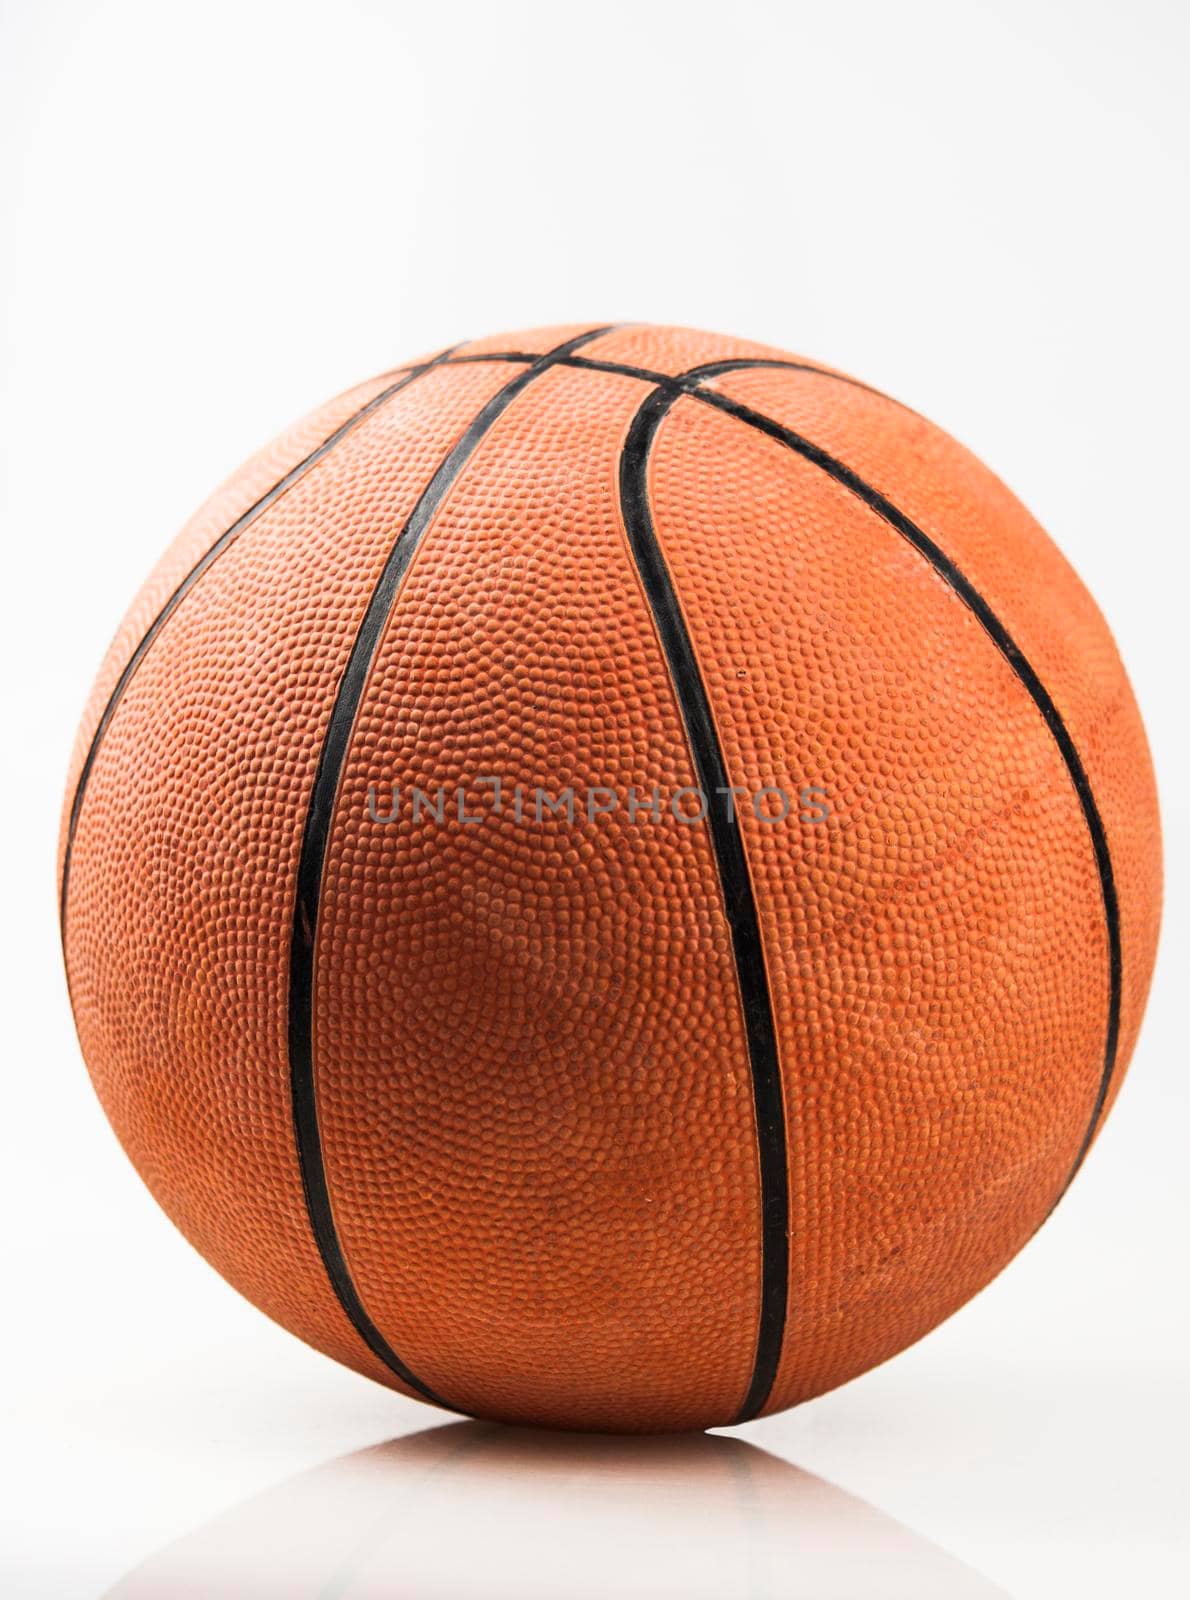 Basketball ball over white background. Orange ball, sports concept.  by inxti